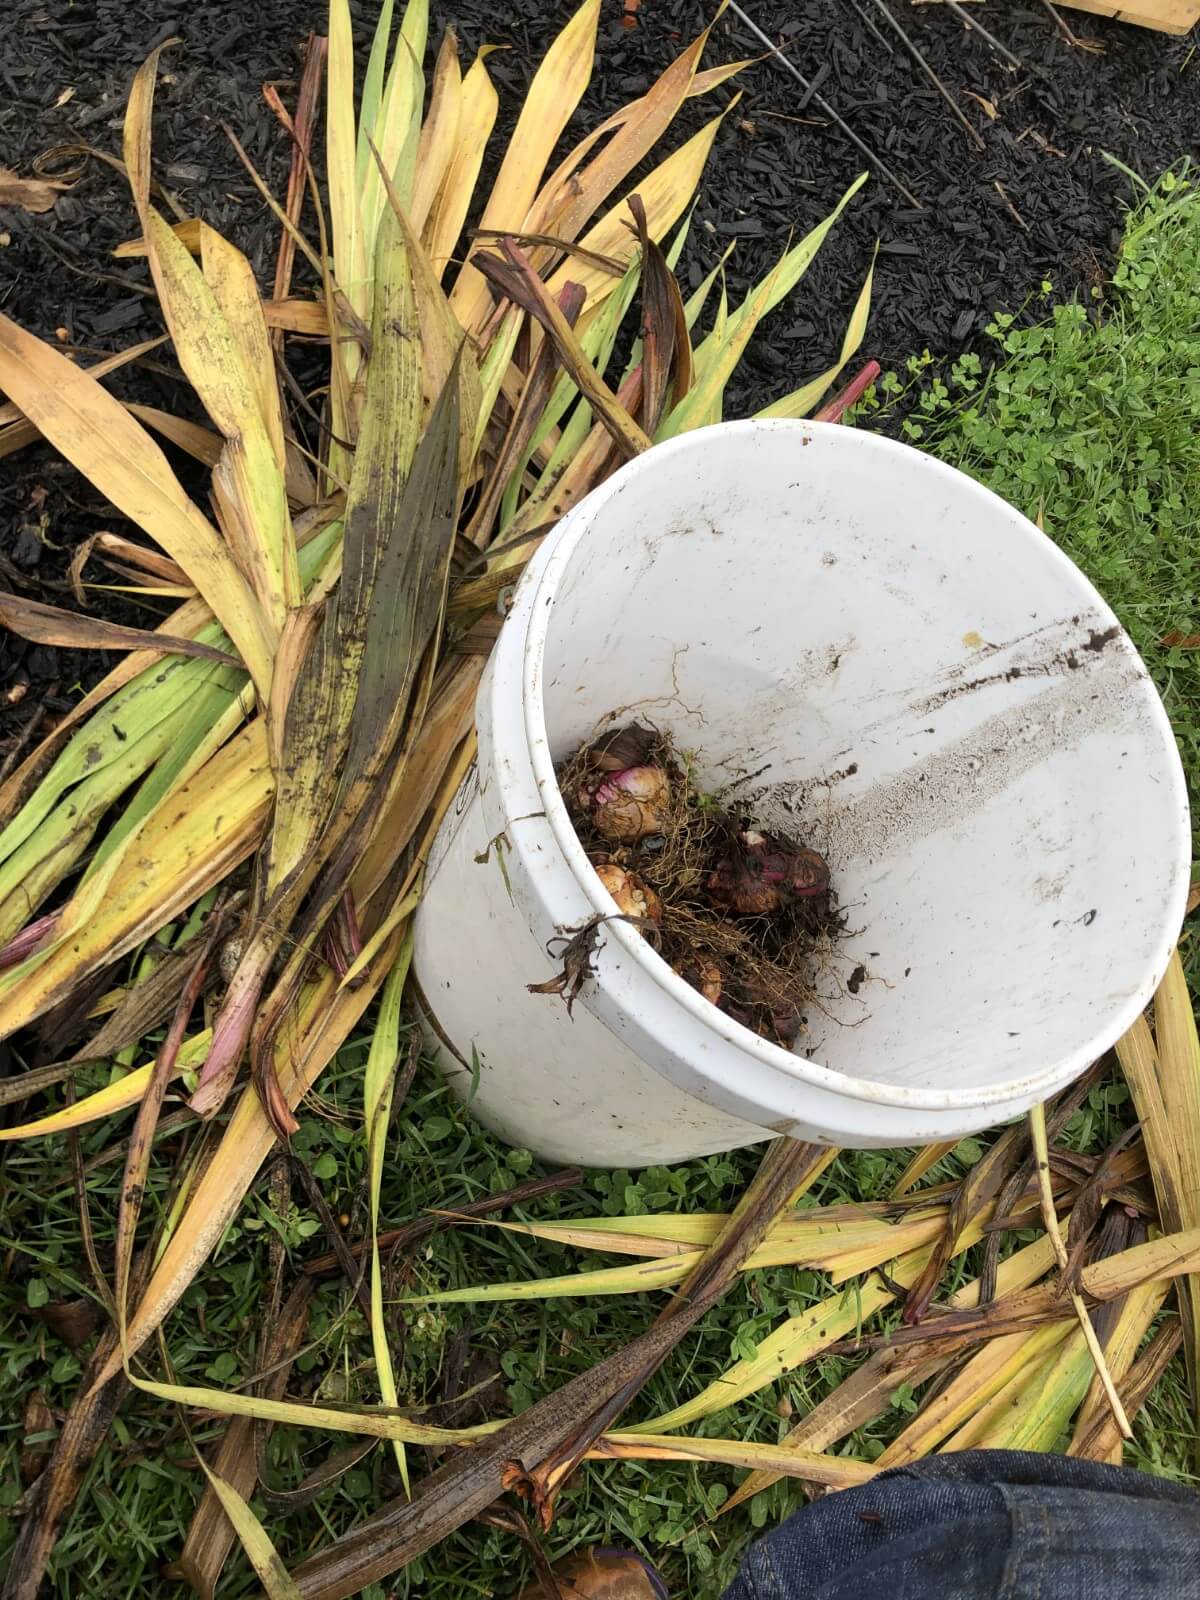 gladiola bulbs pulled and trimmed in bucket for winter storage